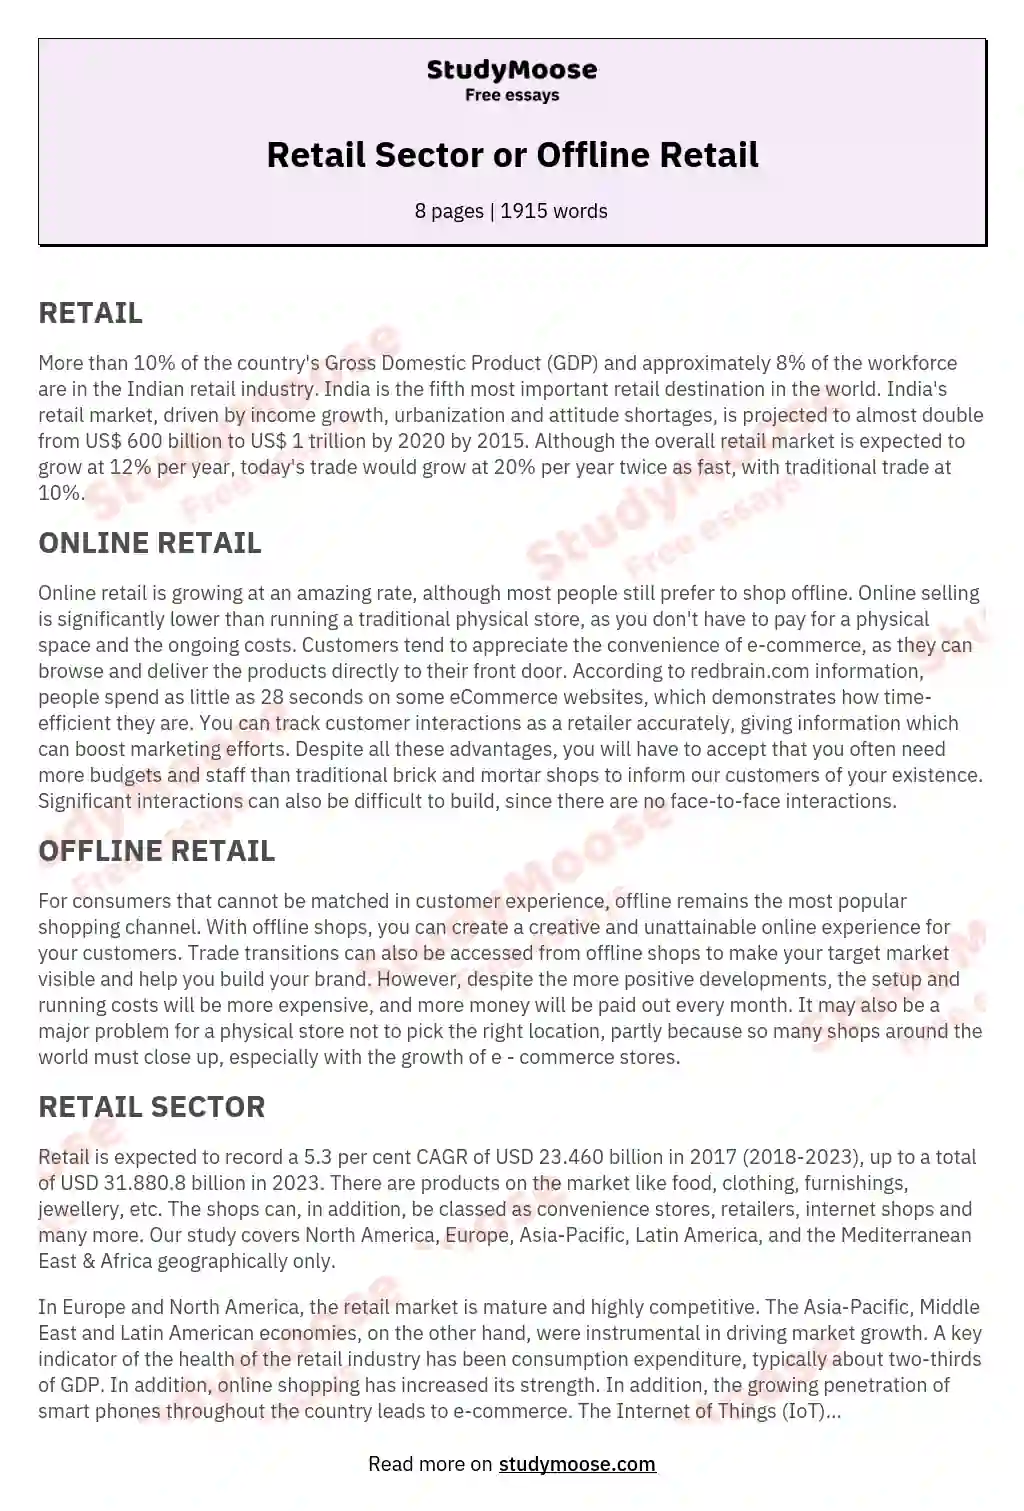 Retail Sector or Offline Retail